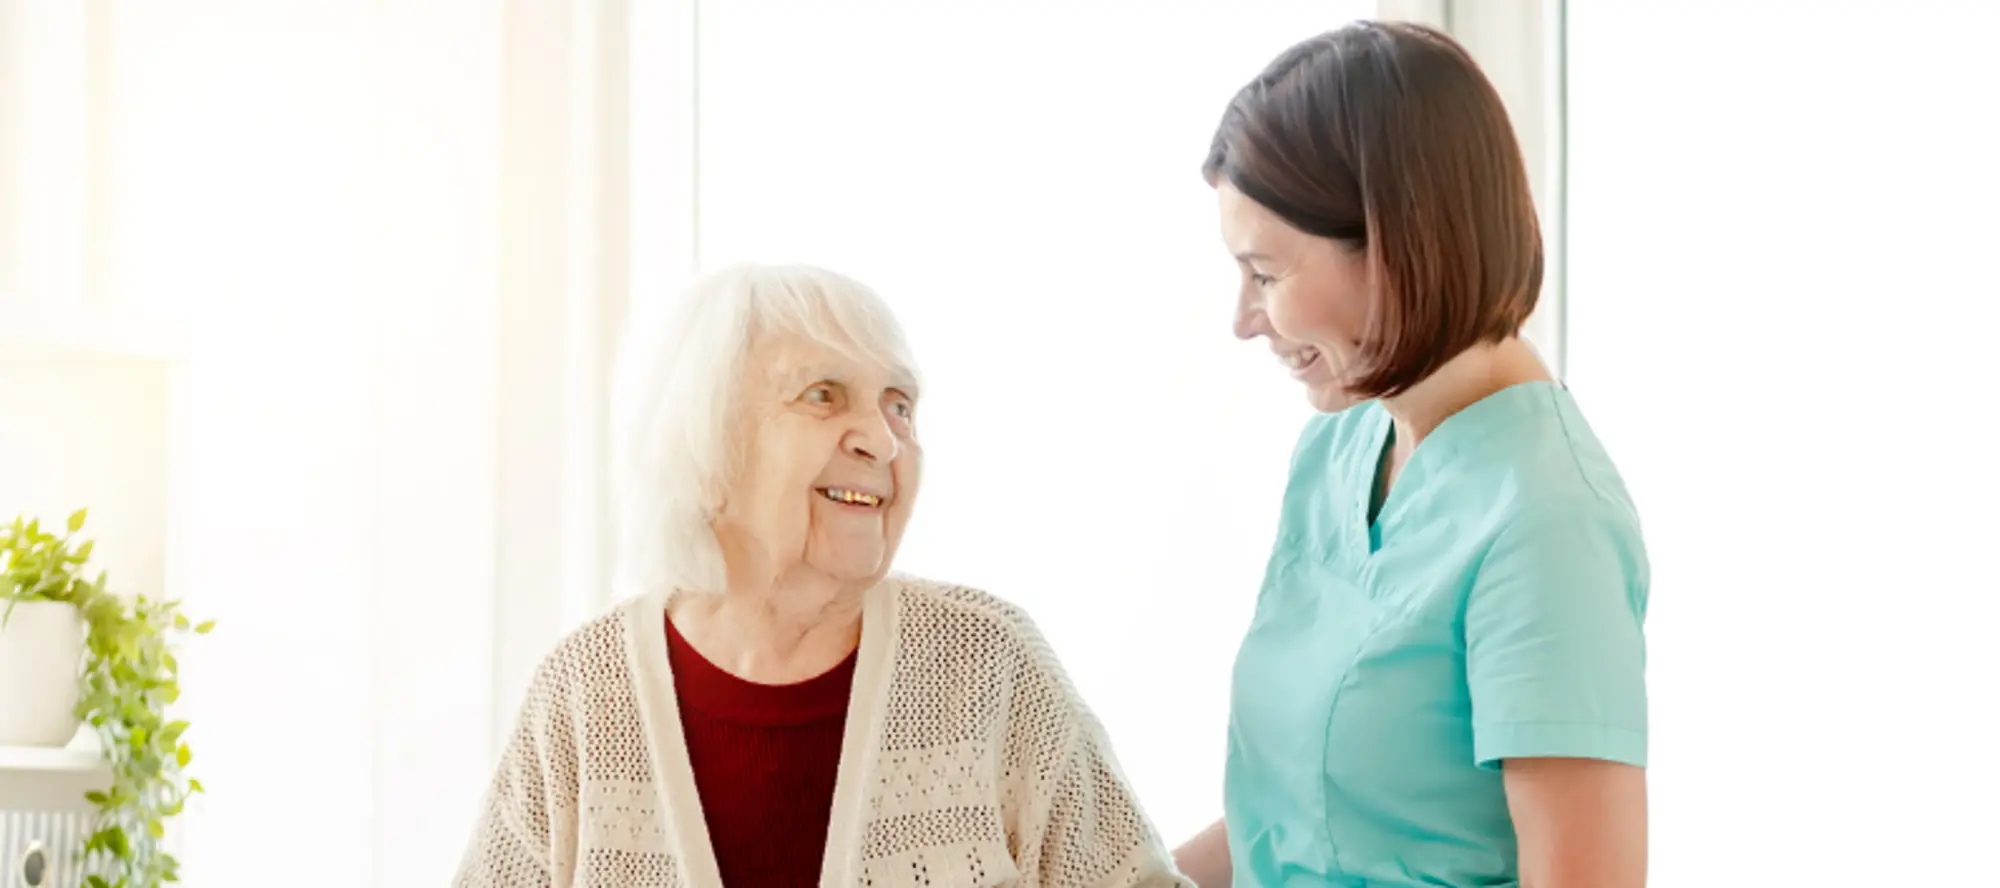 Show respect to build rapport with an elderly patient